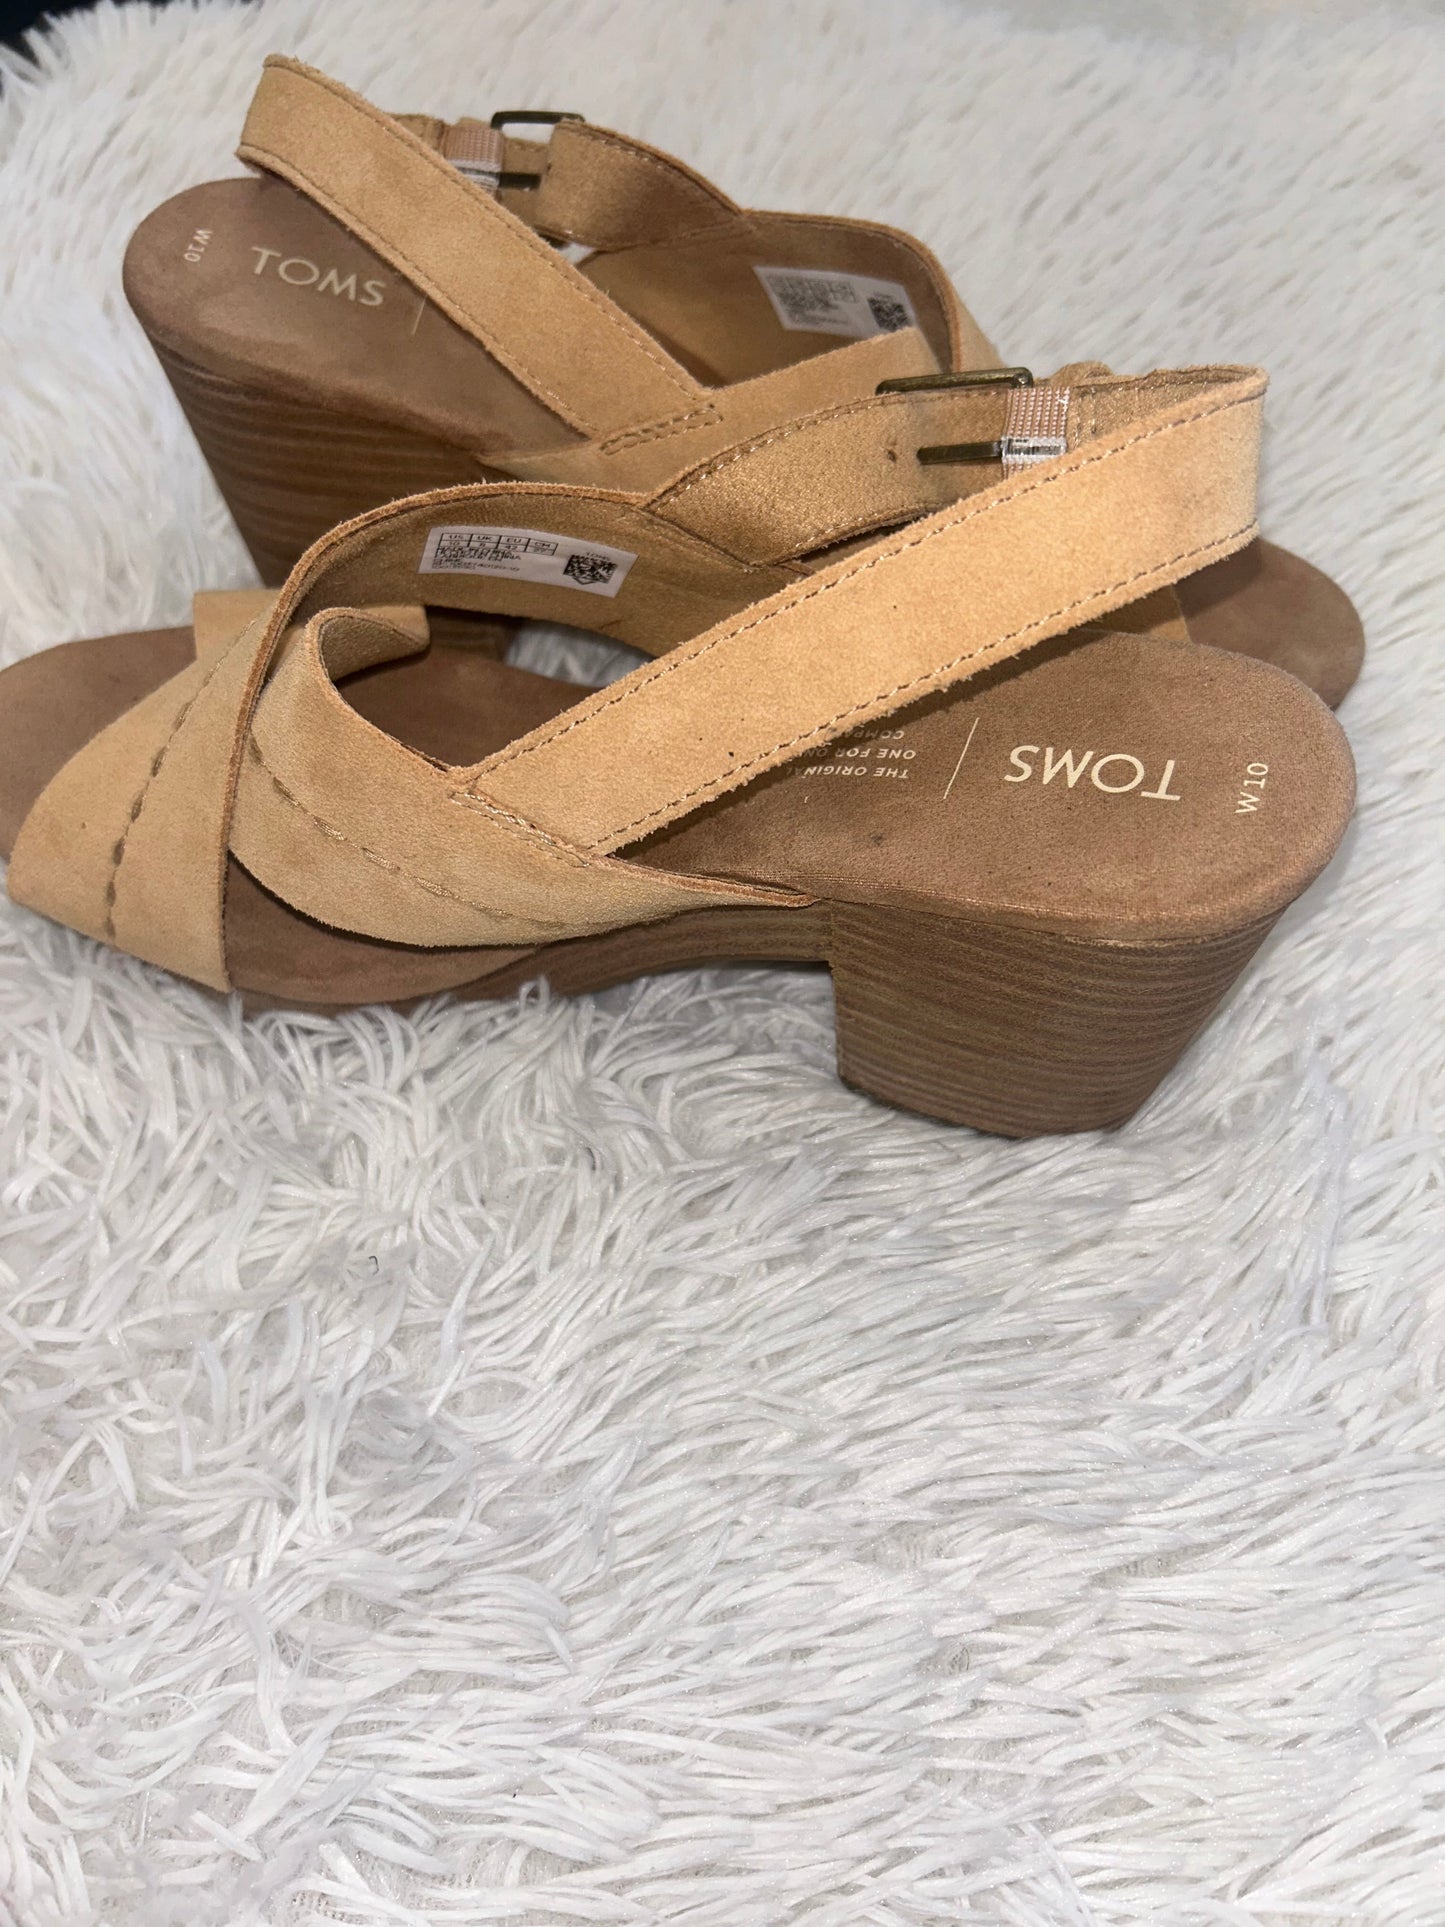 Sandals Heels Block By Toms  Size: 10